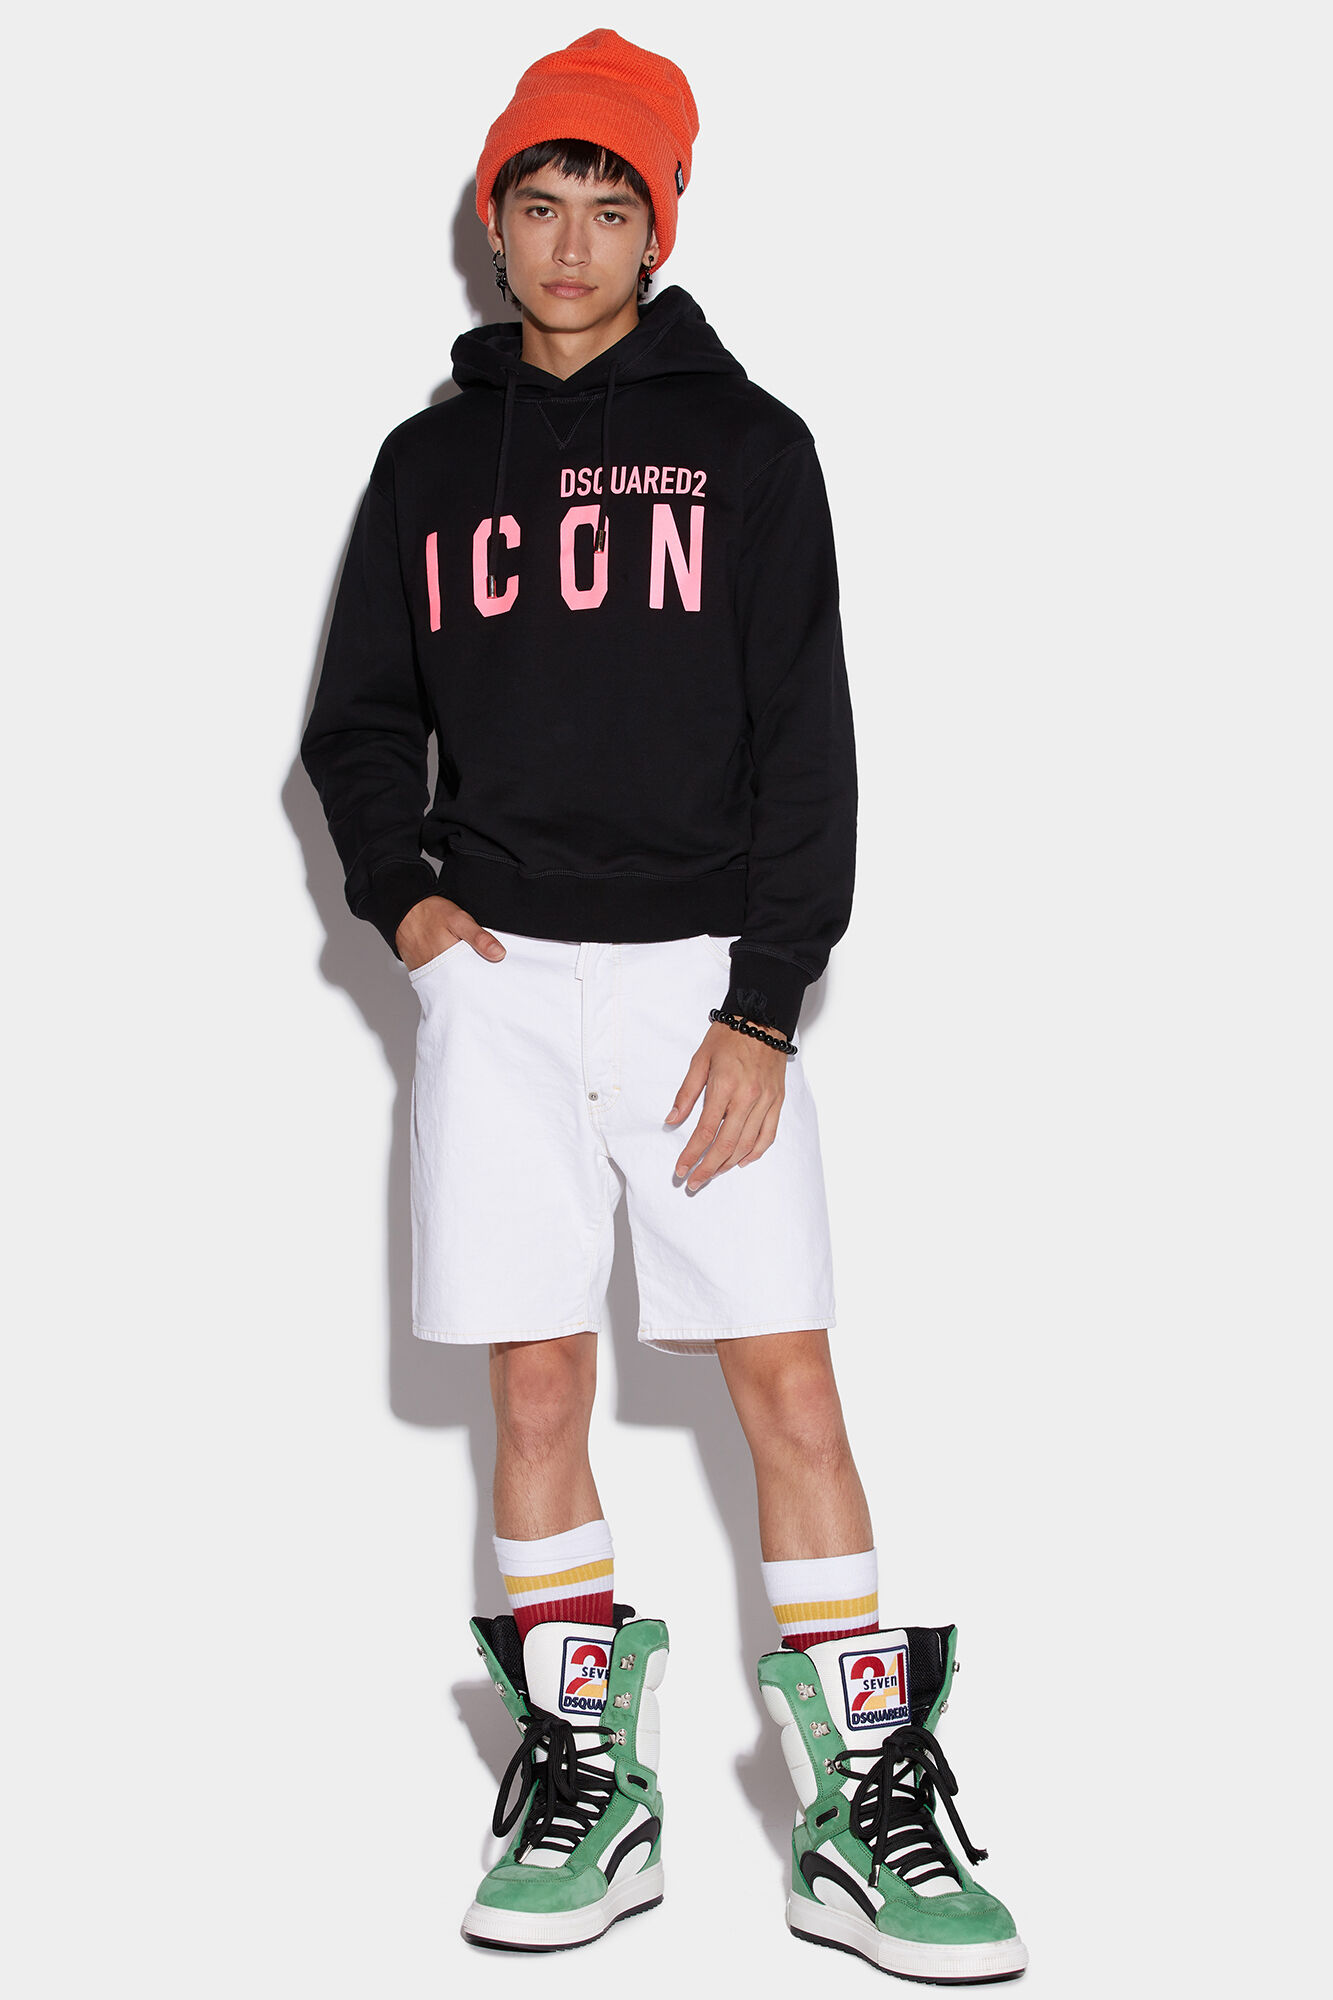 Be Icon Cool Hoodie